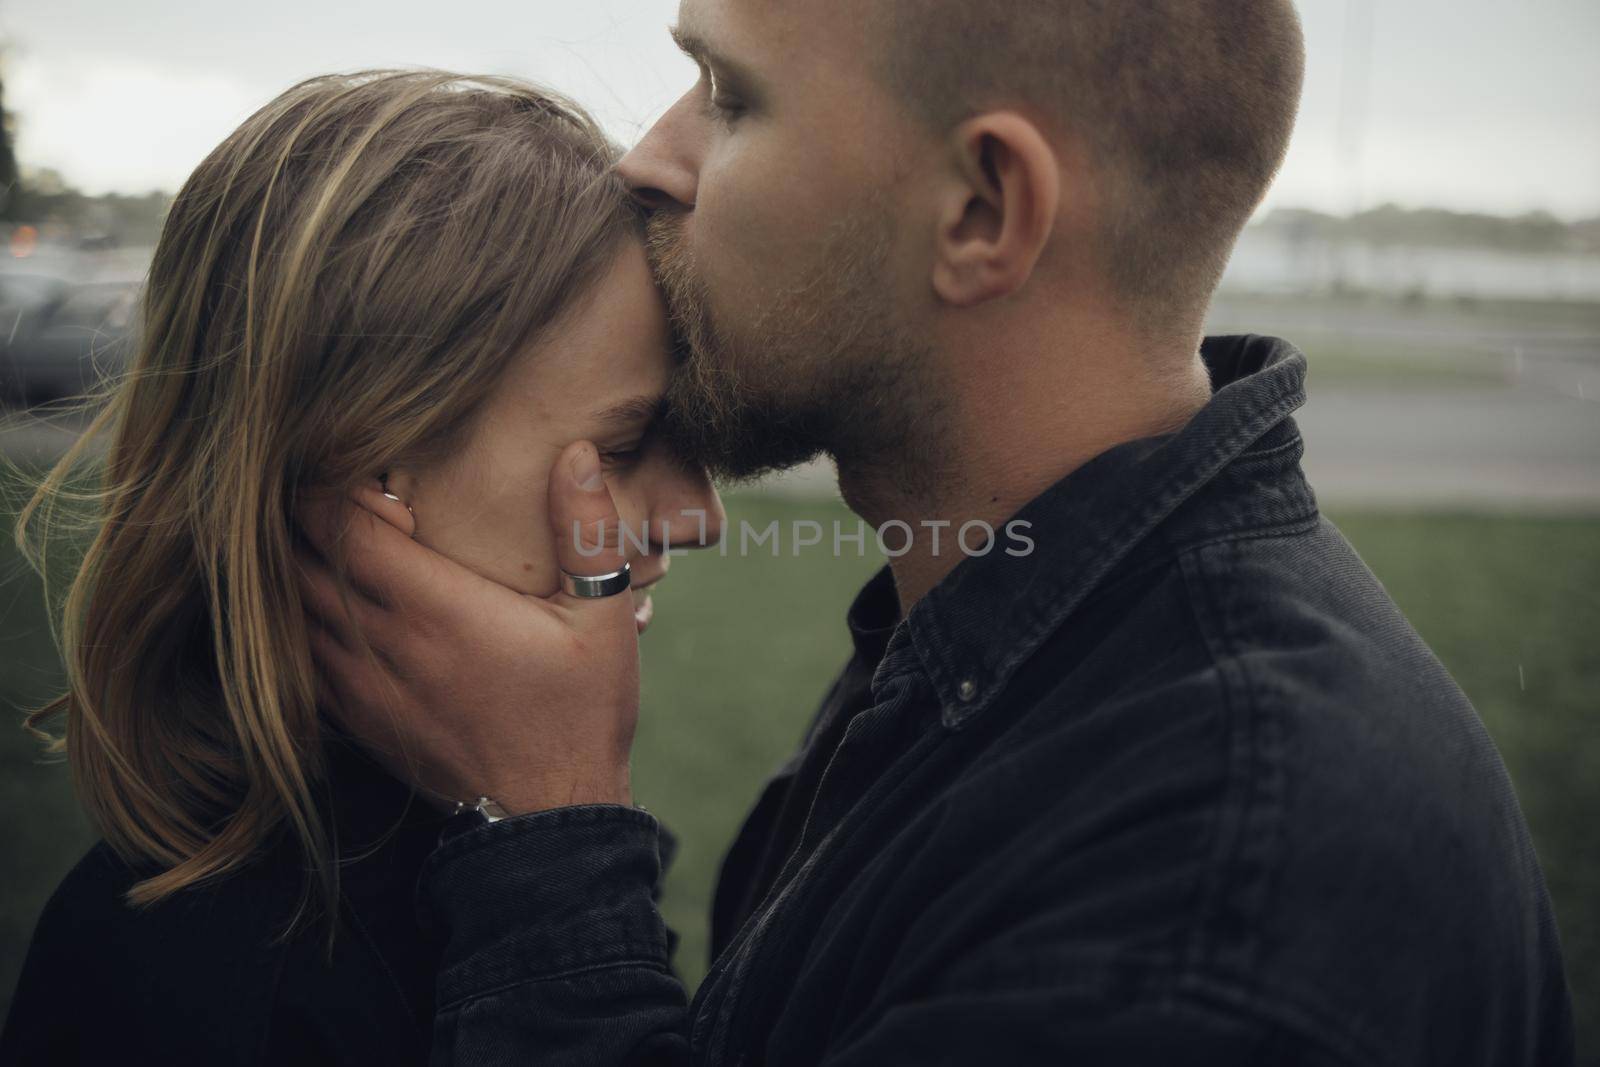 guy gently kisses his beloved holding hands on her face by Symonenko